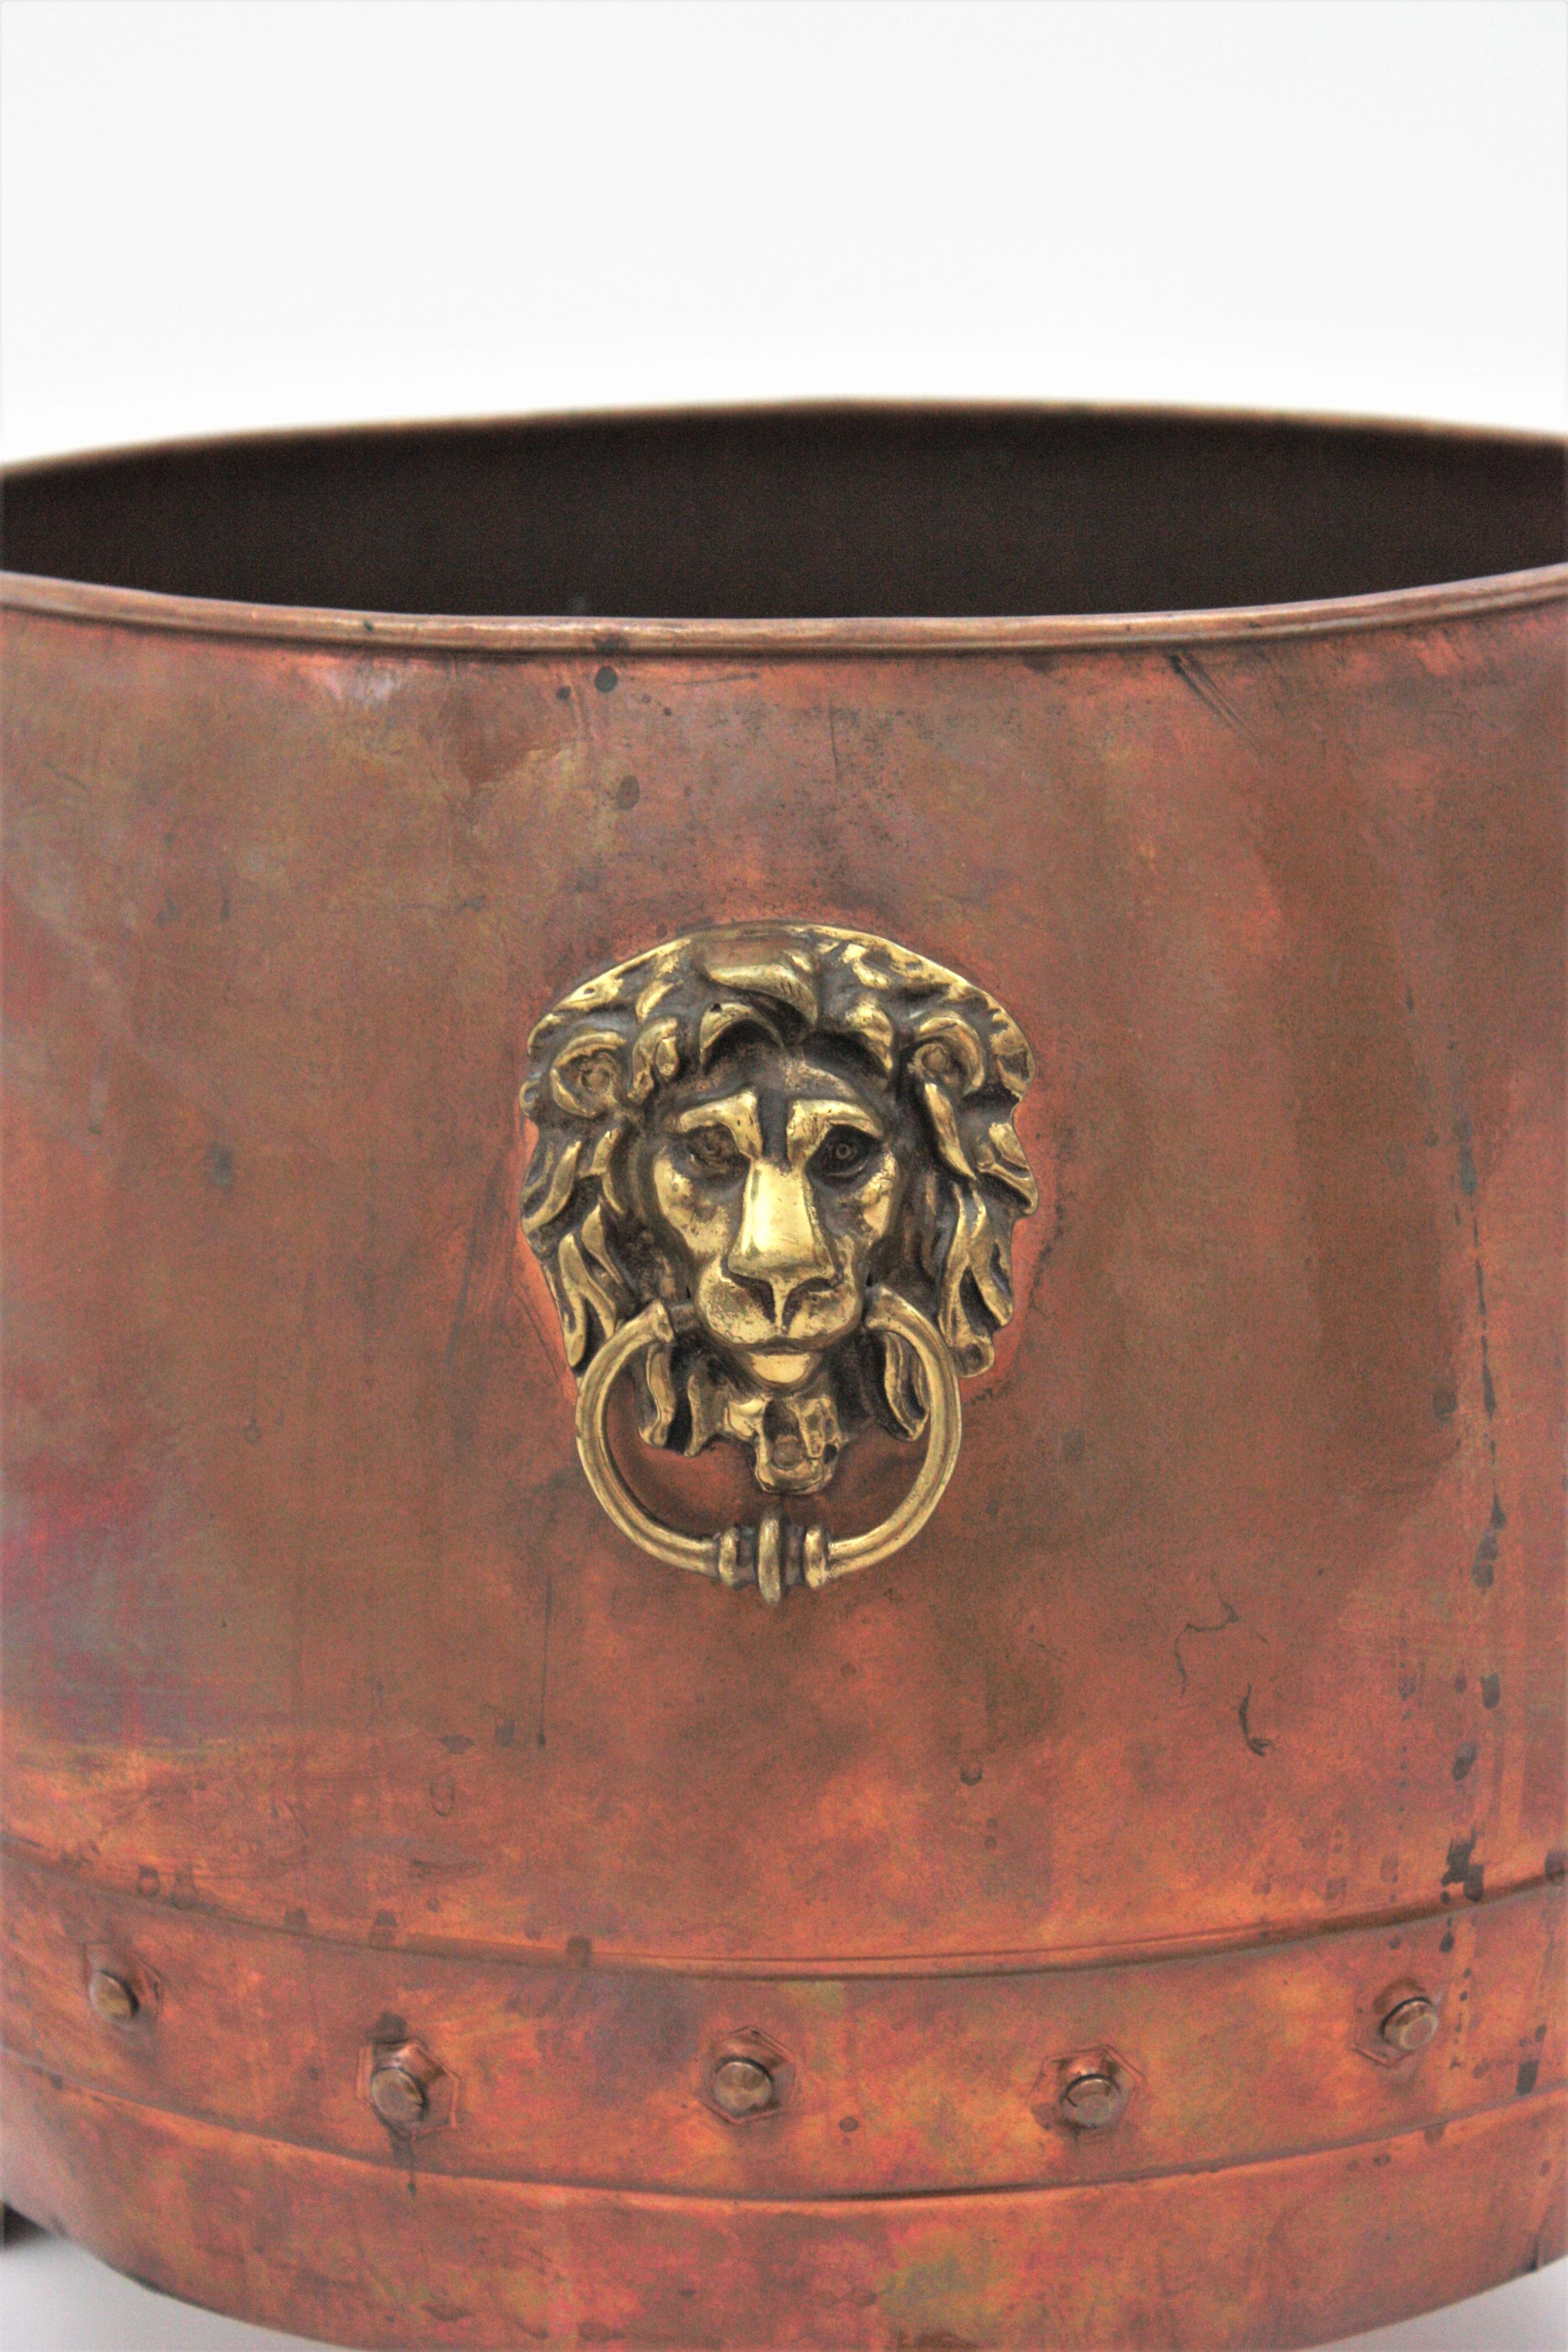 Hand-Crafted French Copper Cauldron Champagne Cooler or Planter with Lion Heads